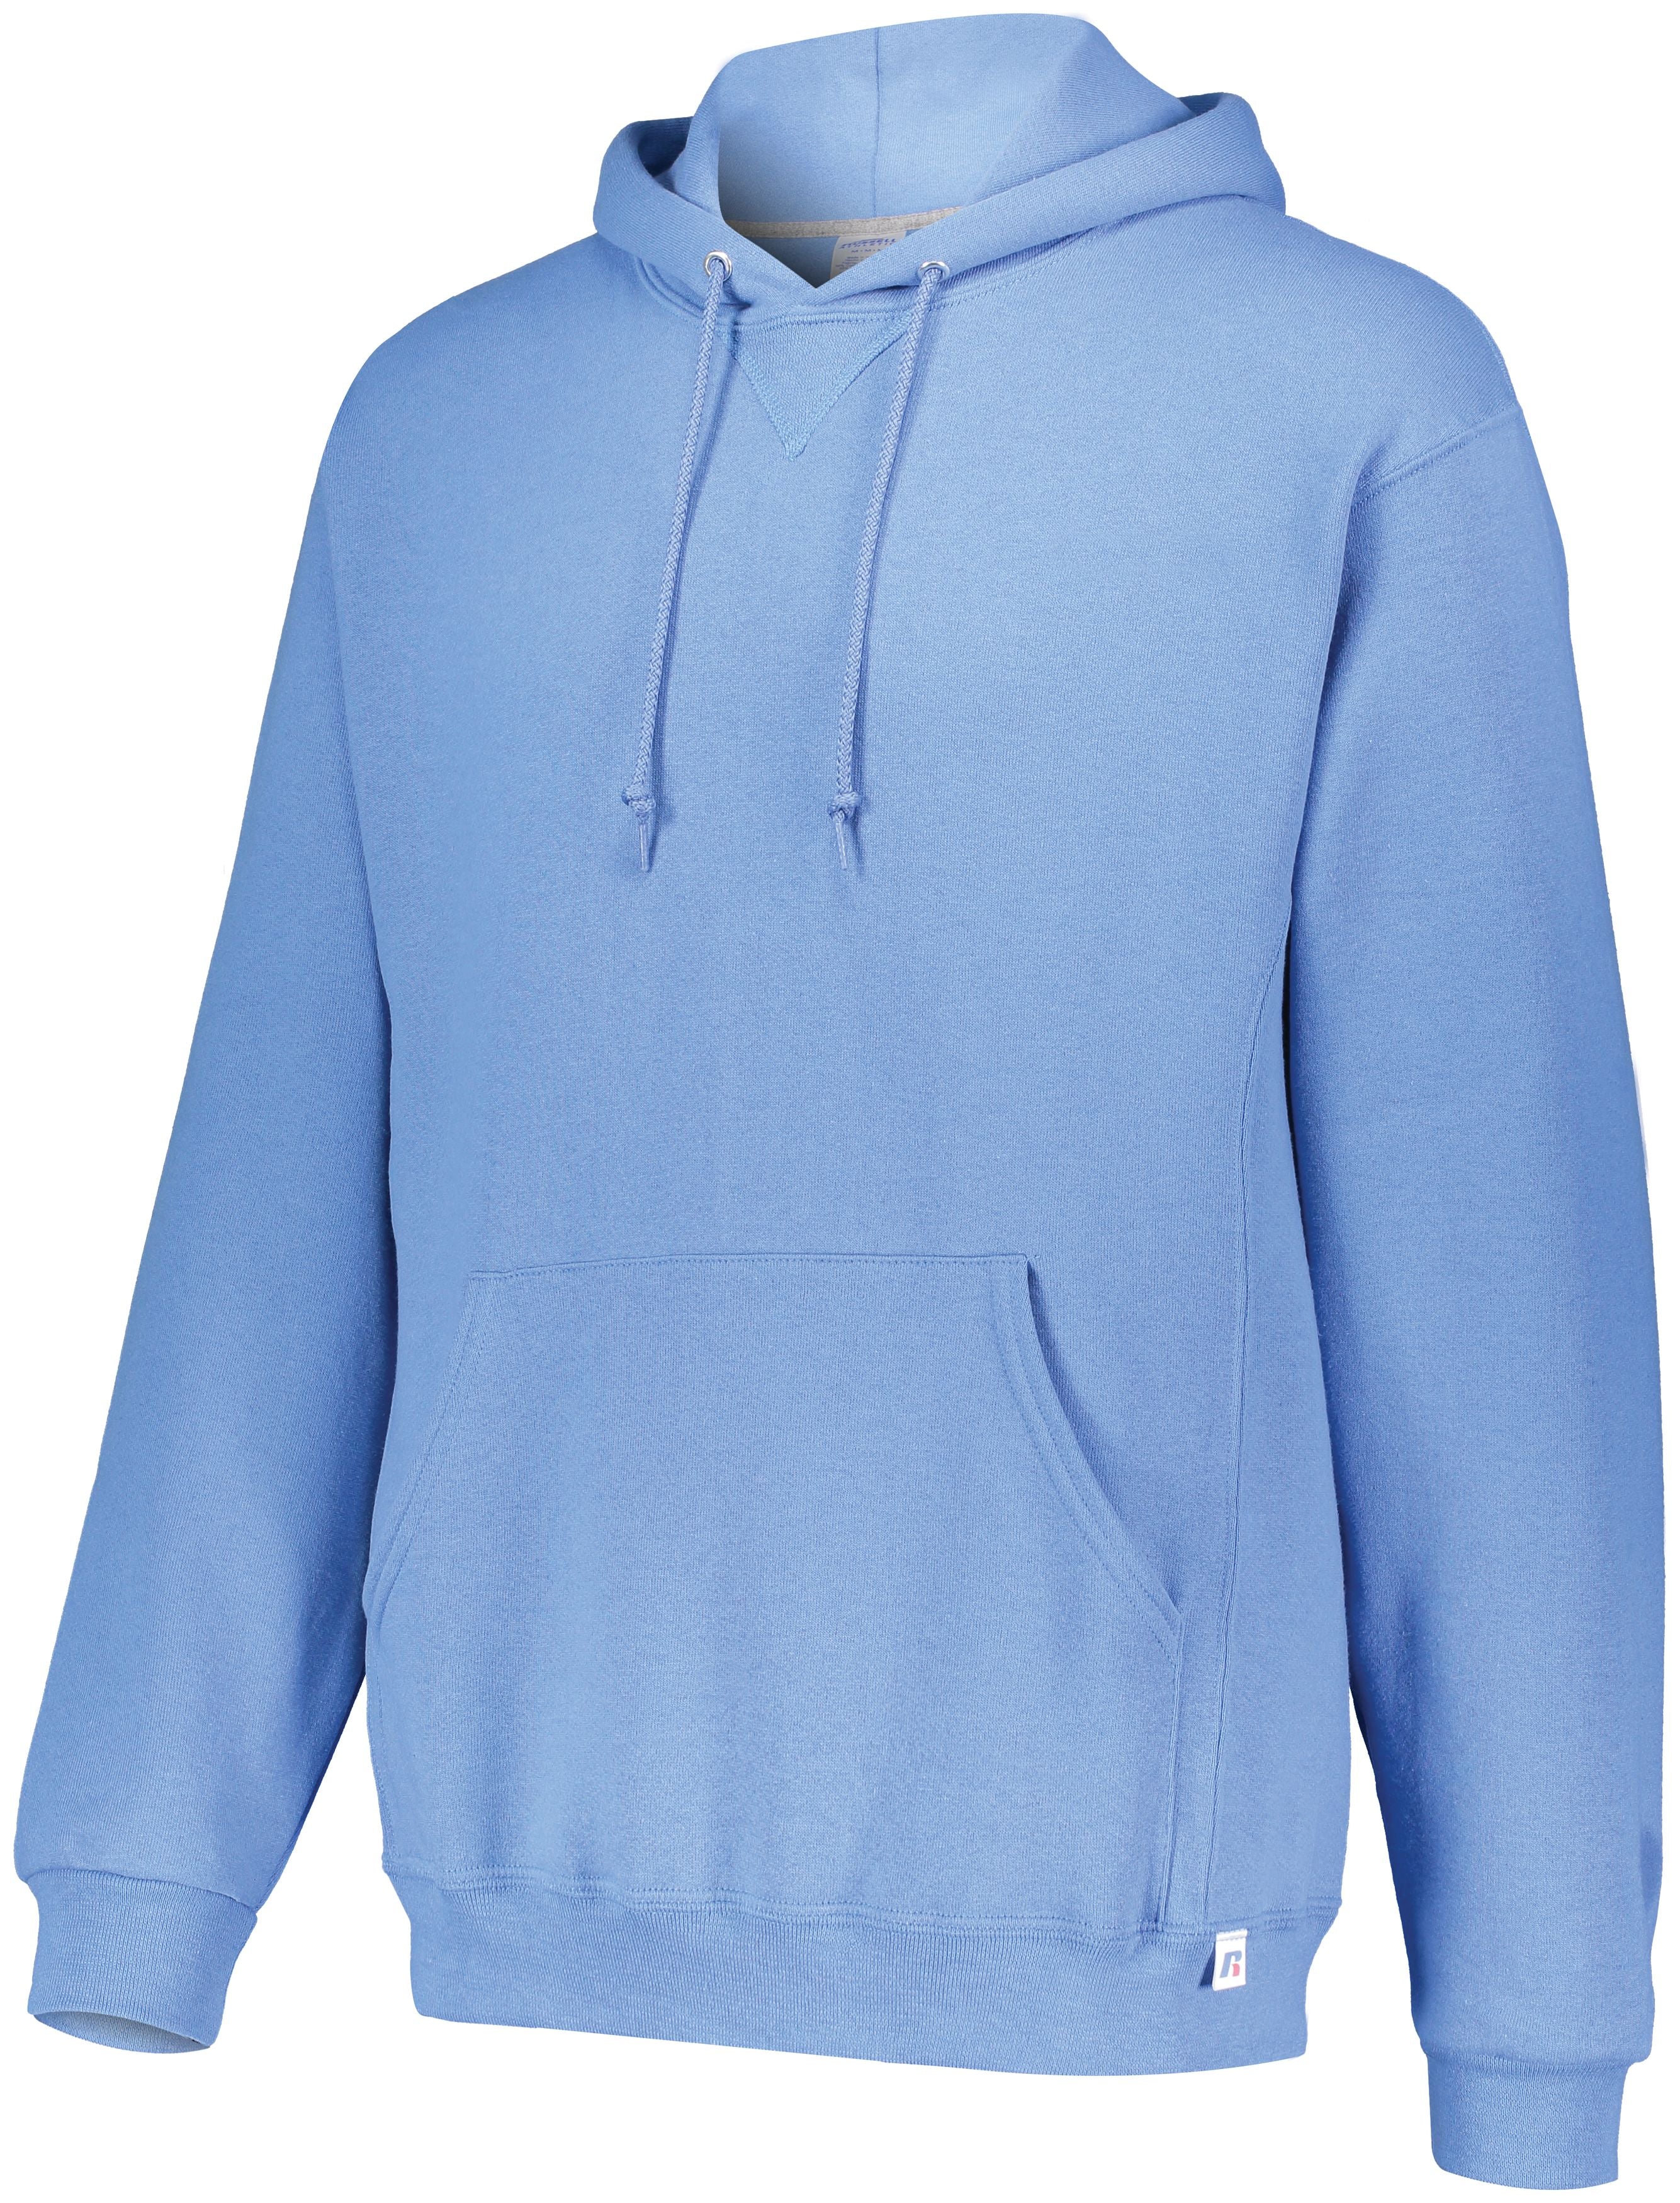 Russell Athletic Dri-Power Fleece Hoodie in Collegiate Blue  -Part of the Adult, Russell-Athletic-Products, Shirts product lines at KanaleyCreations.com